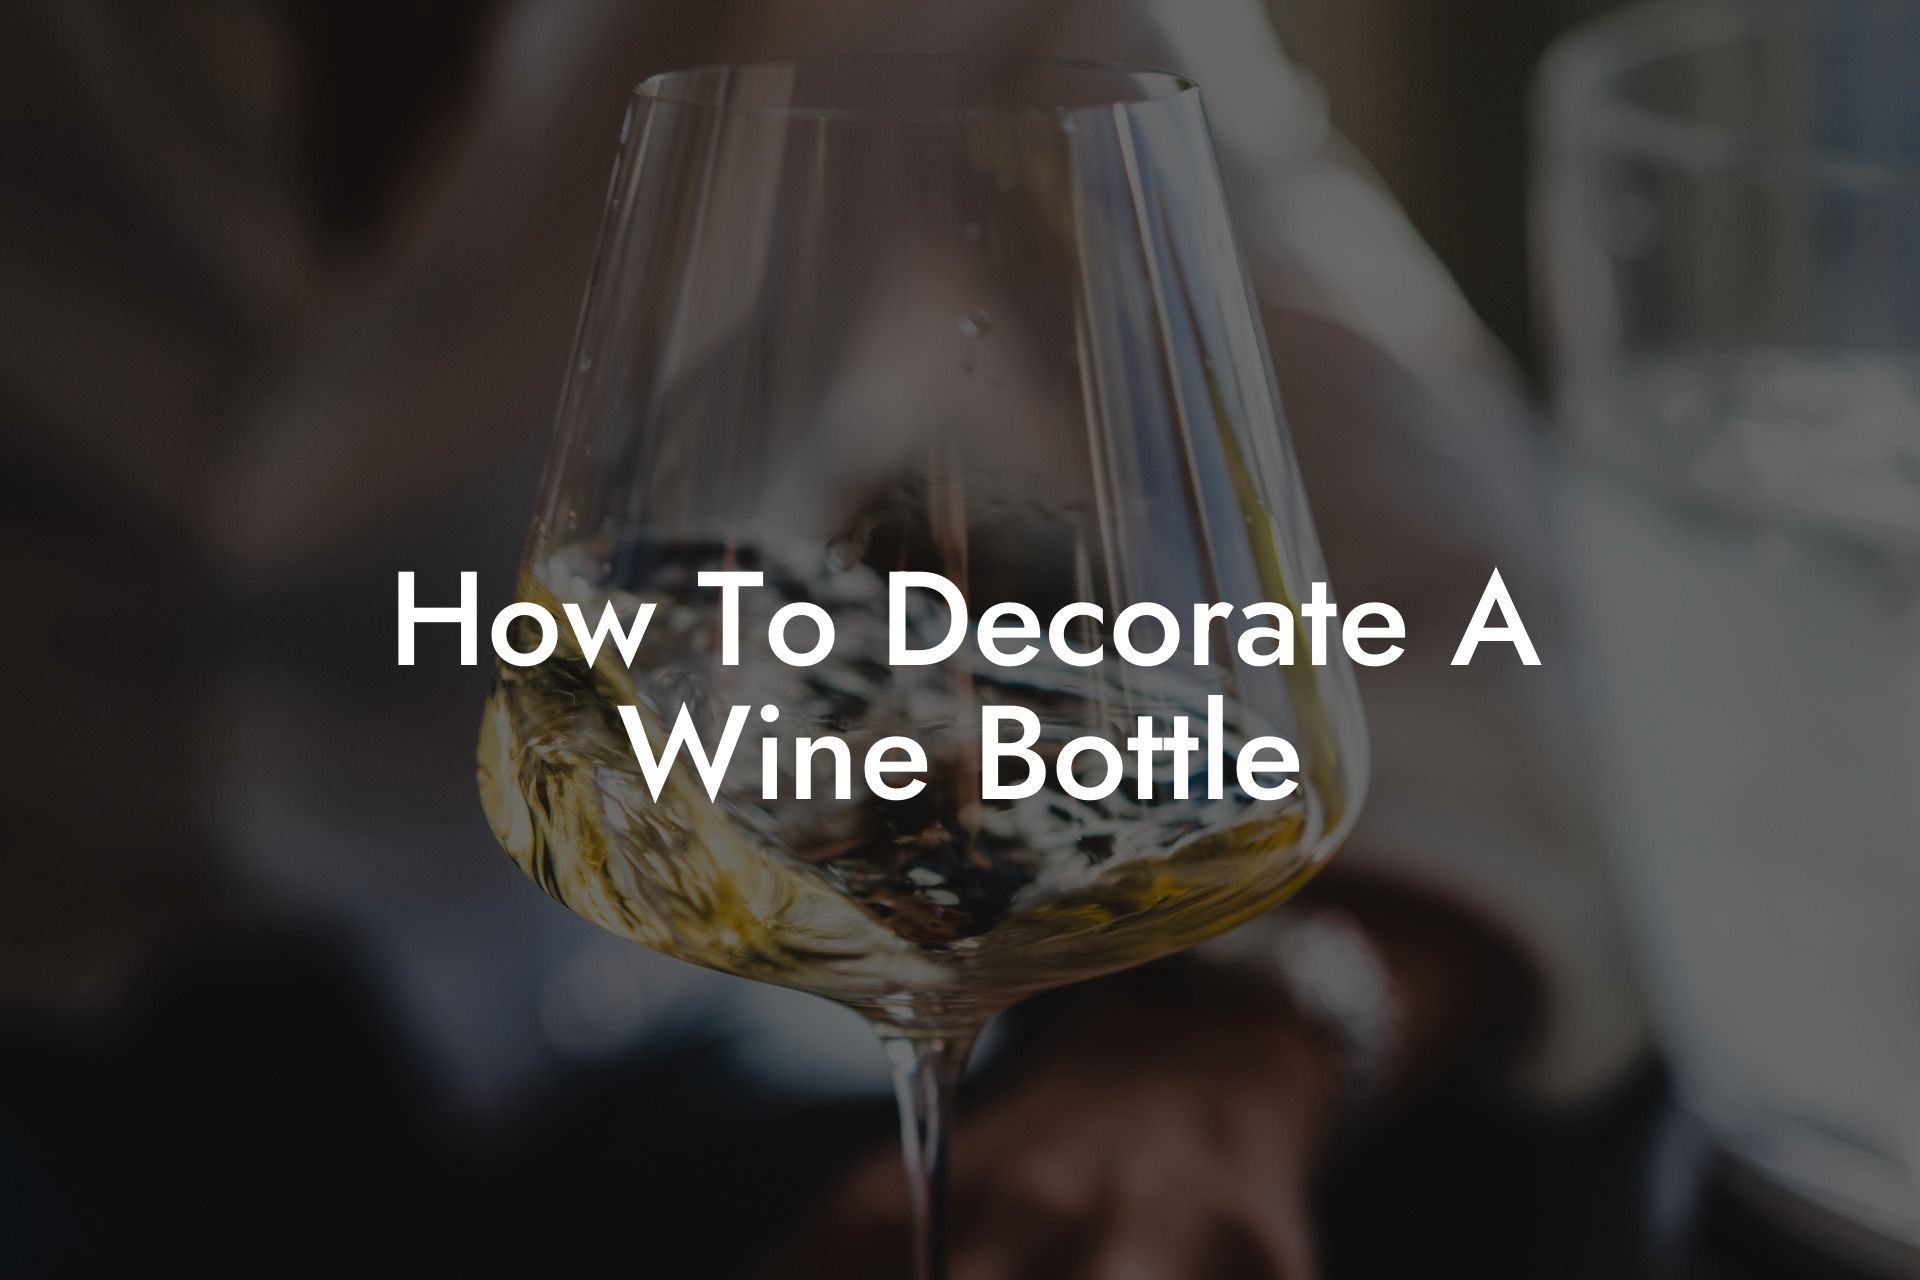 How To Decorate A Wine Bottle